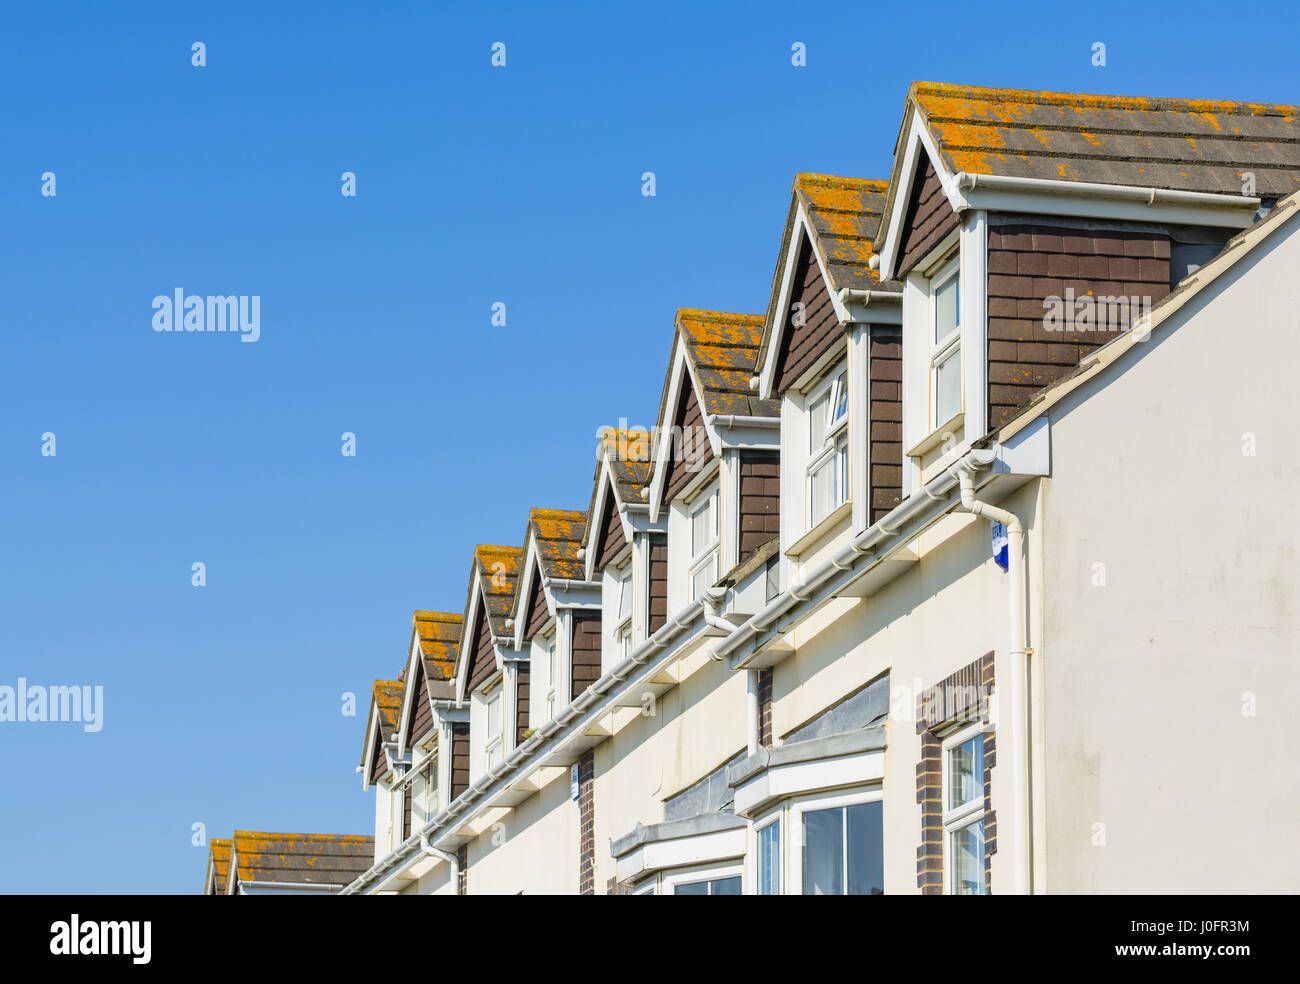 Dormer windows in the roofing of a terraced houses in the UK. Stock Photo